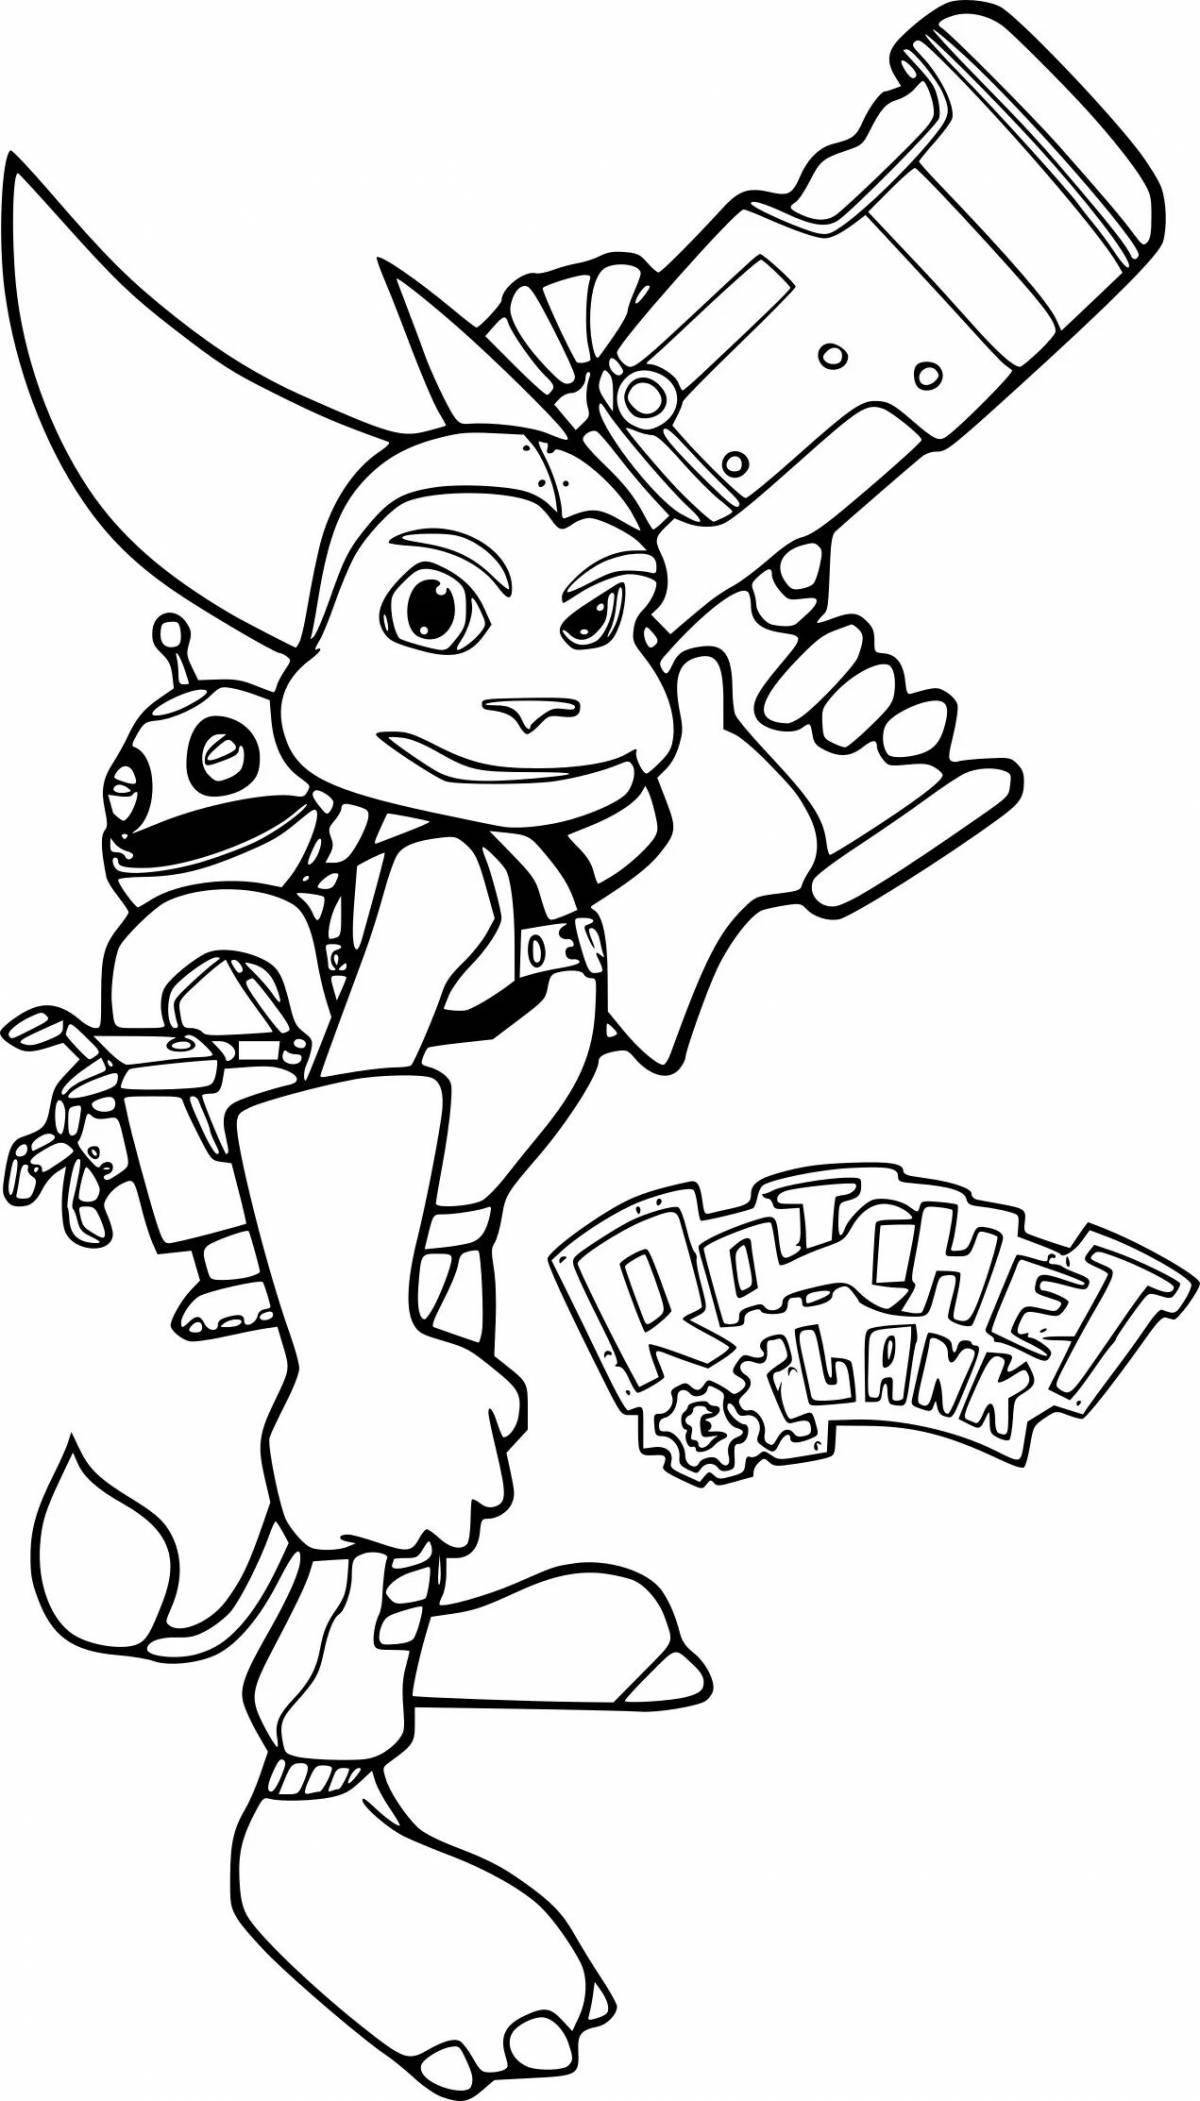 Bright ratchet and clank coloring page